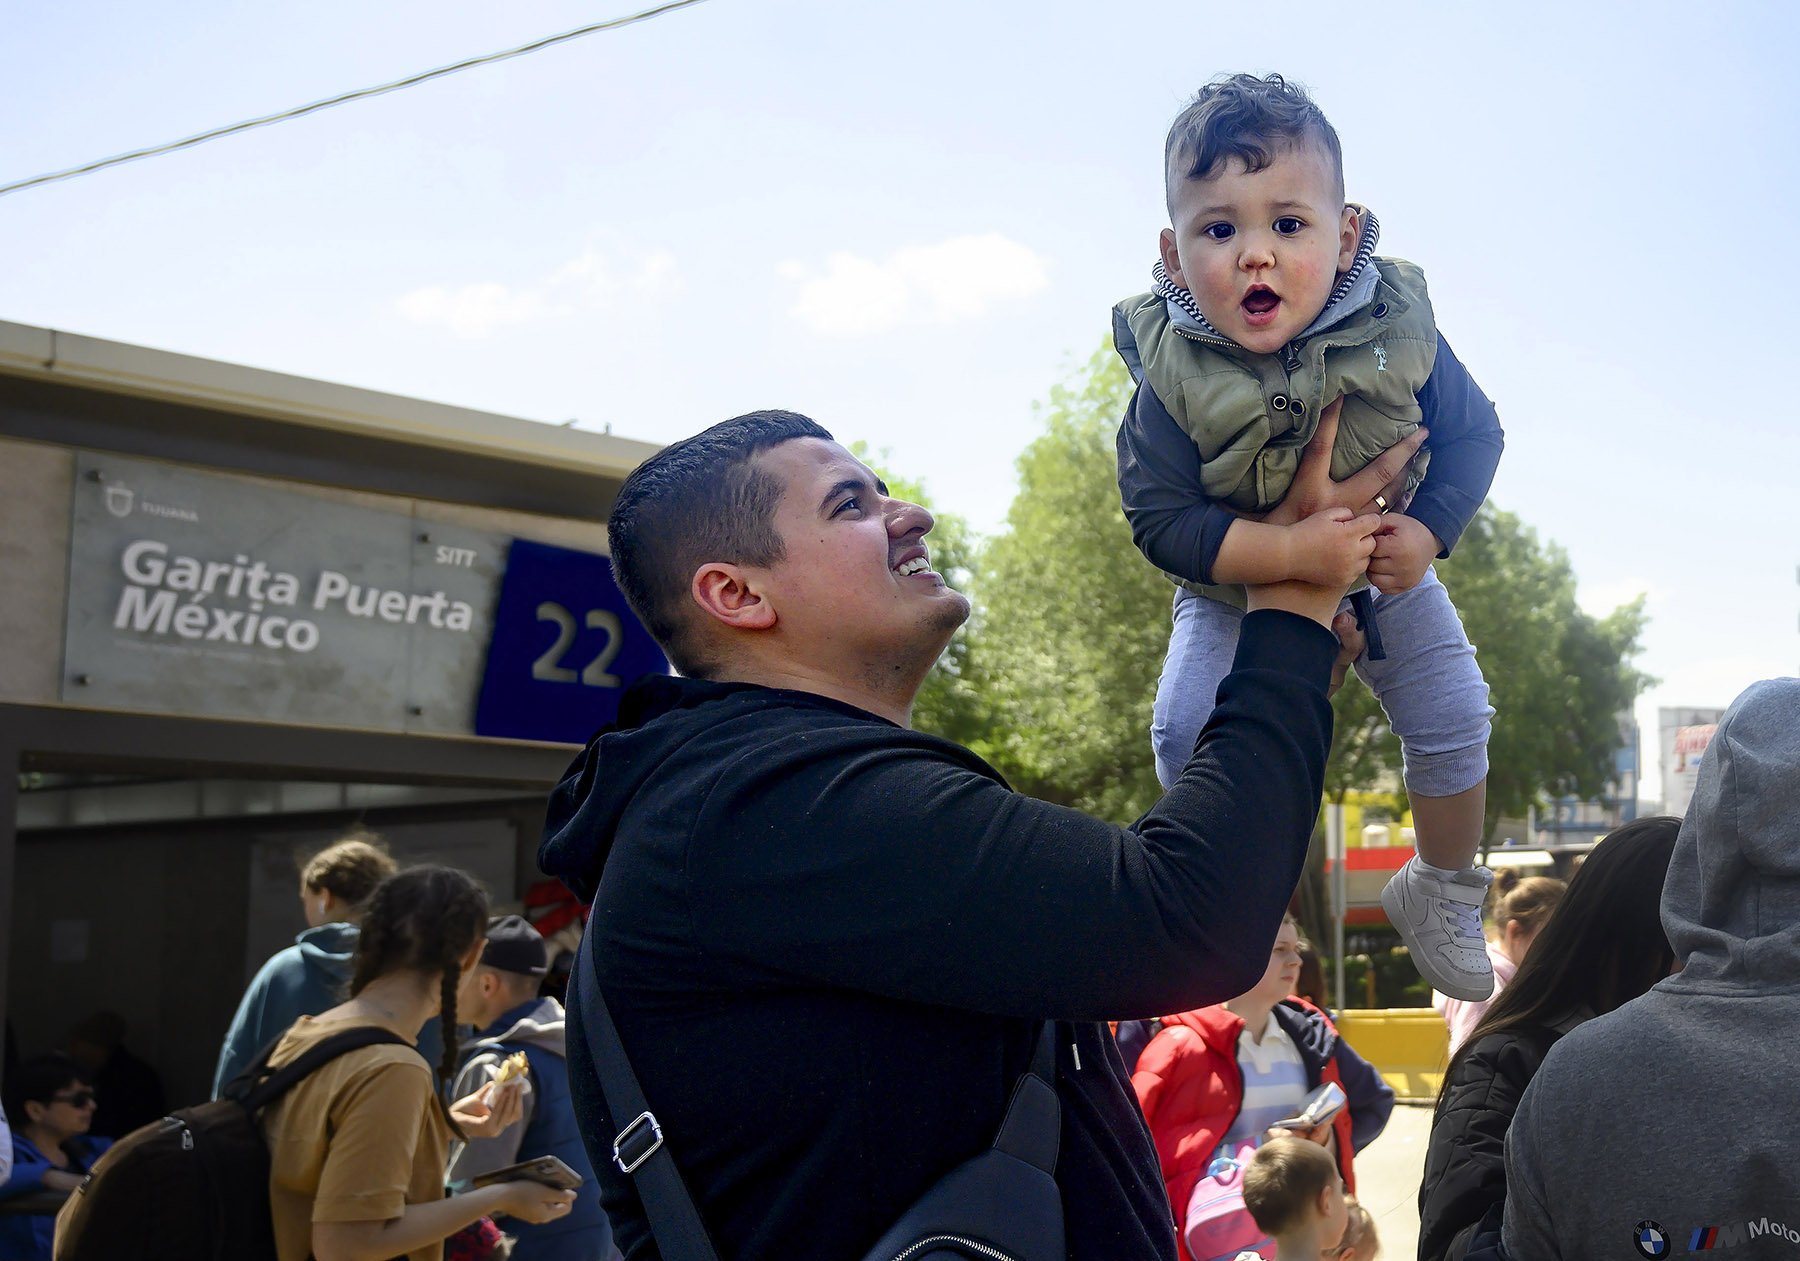  Artur Shkodinov tries to keep his 1-year-old son, Damir, entertained on Wednesday, March 30, 2022 while waiting  at the Tijuana border with his family for entry into the U.S. as refugees. For most people, it's a wait of at least a day now to get acr